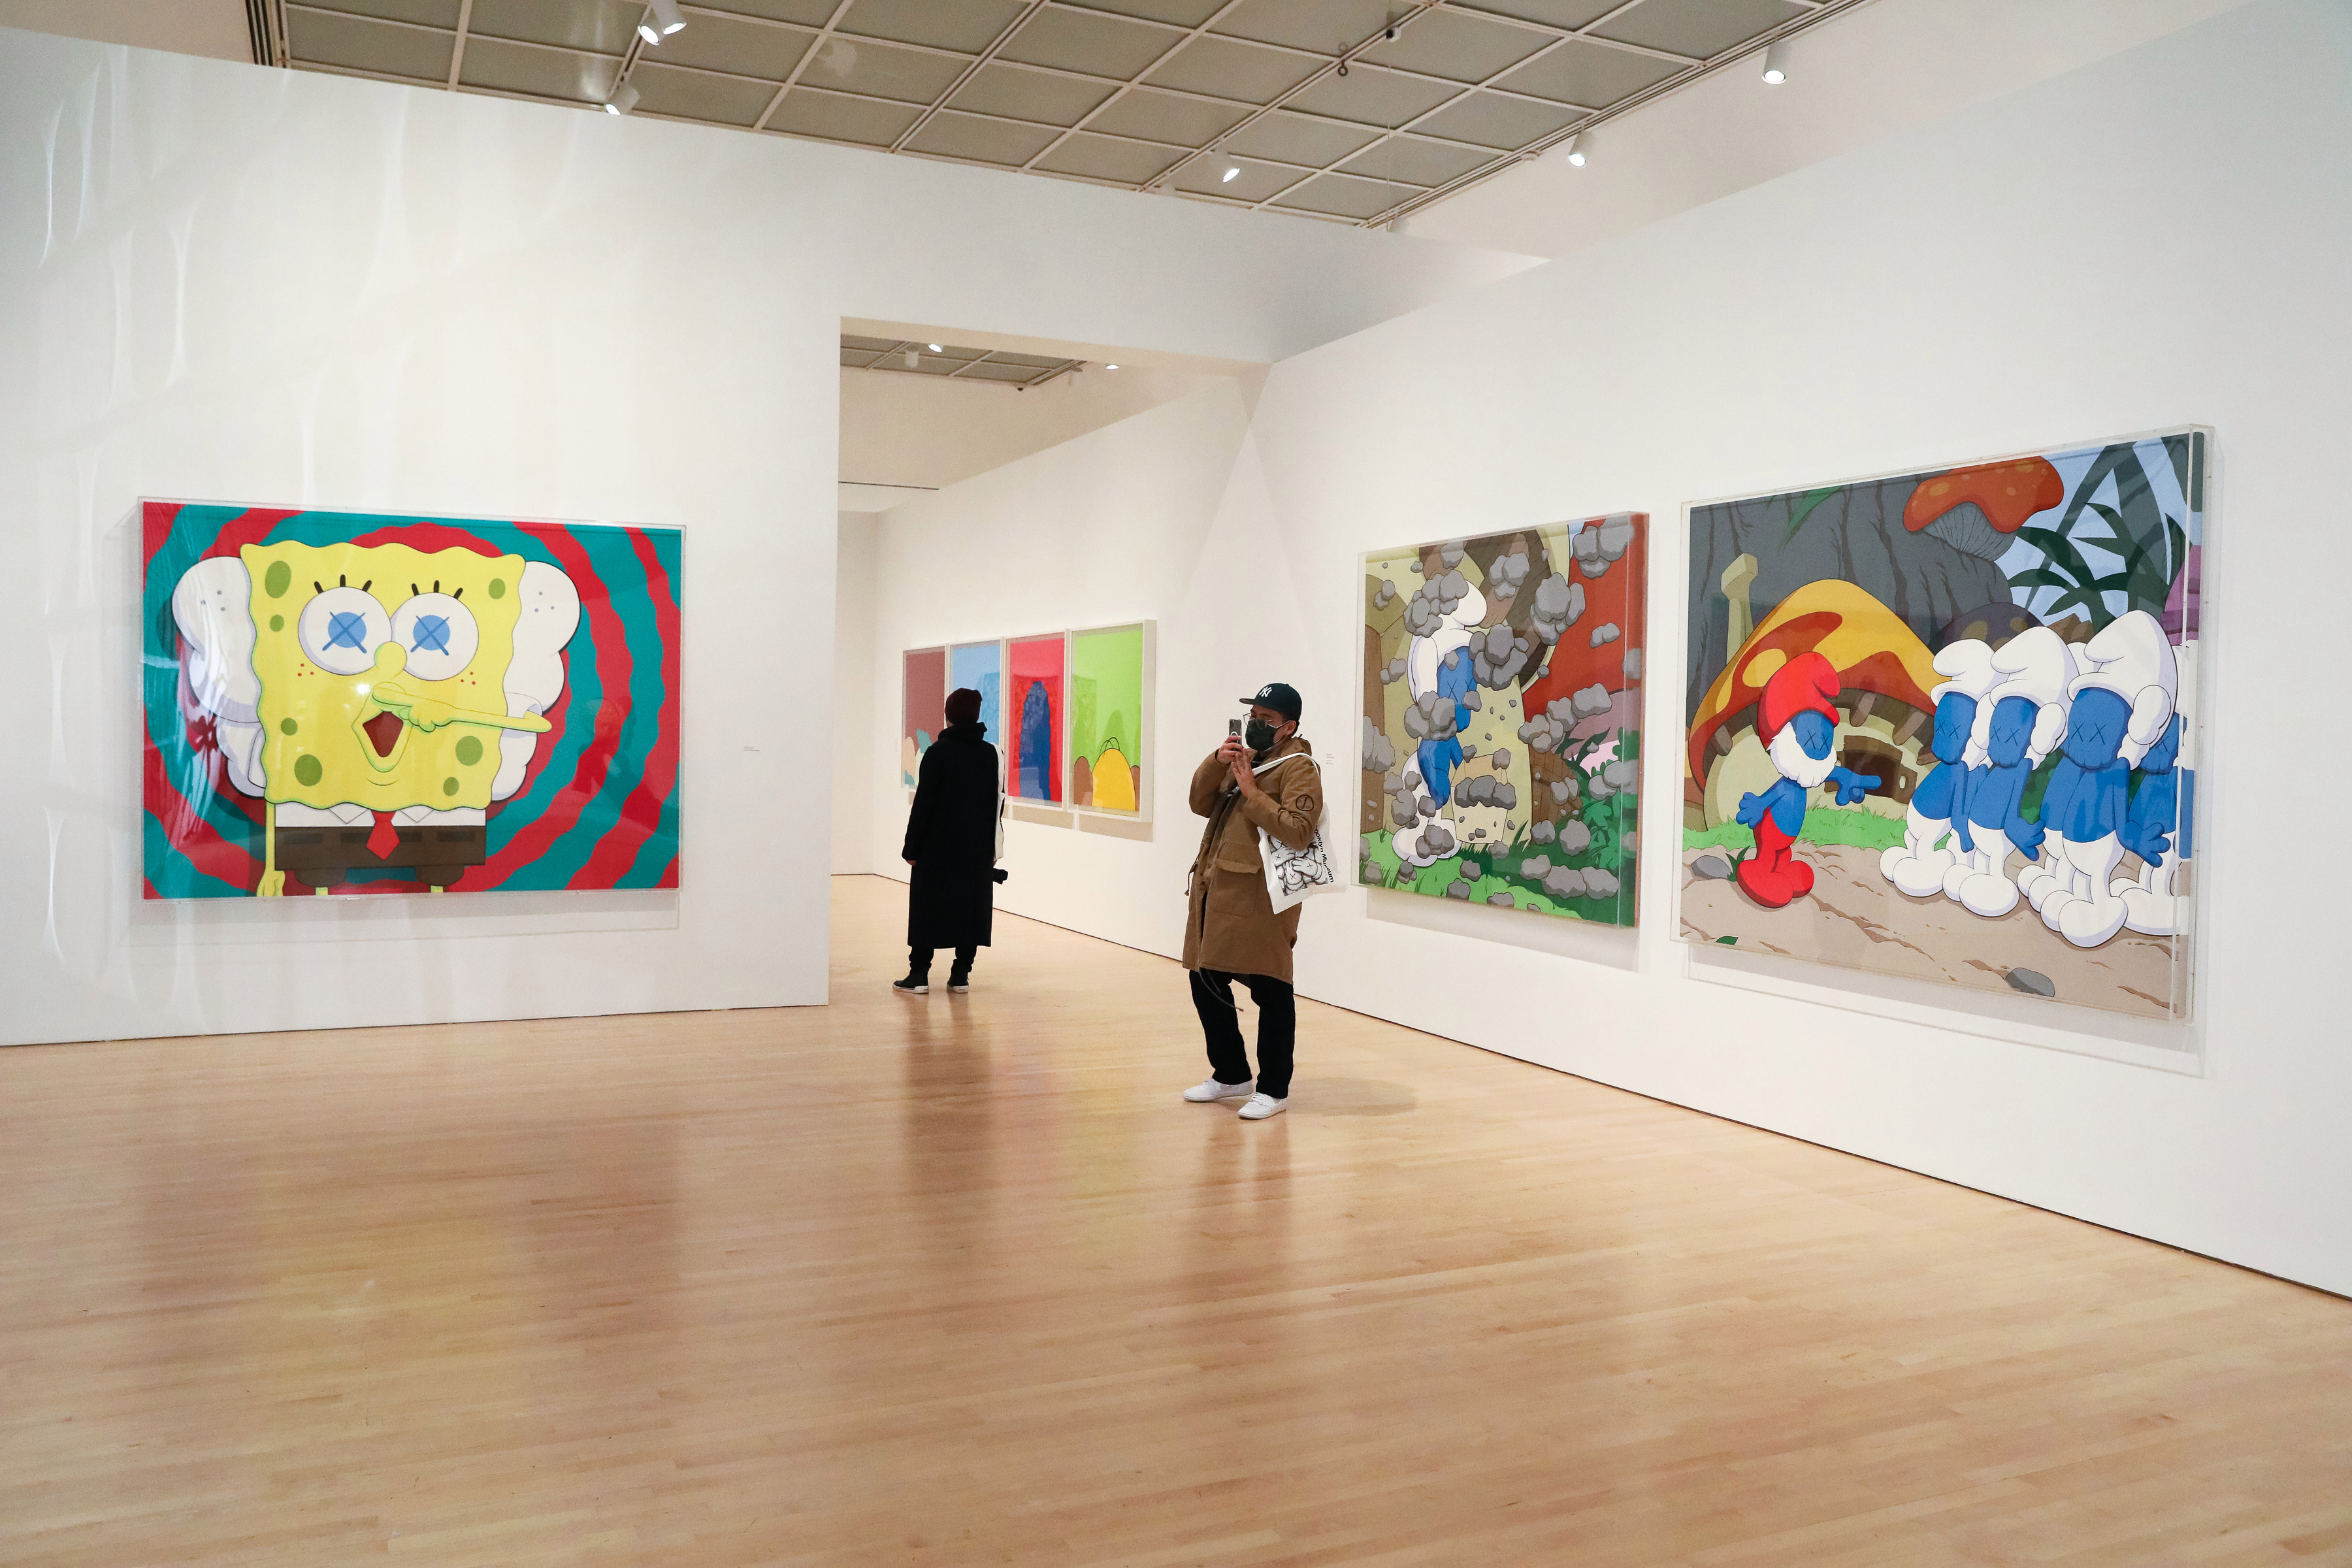 Installation view of "Kaws: What Party" at Brooklyn Museum.